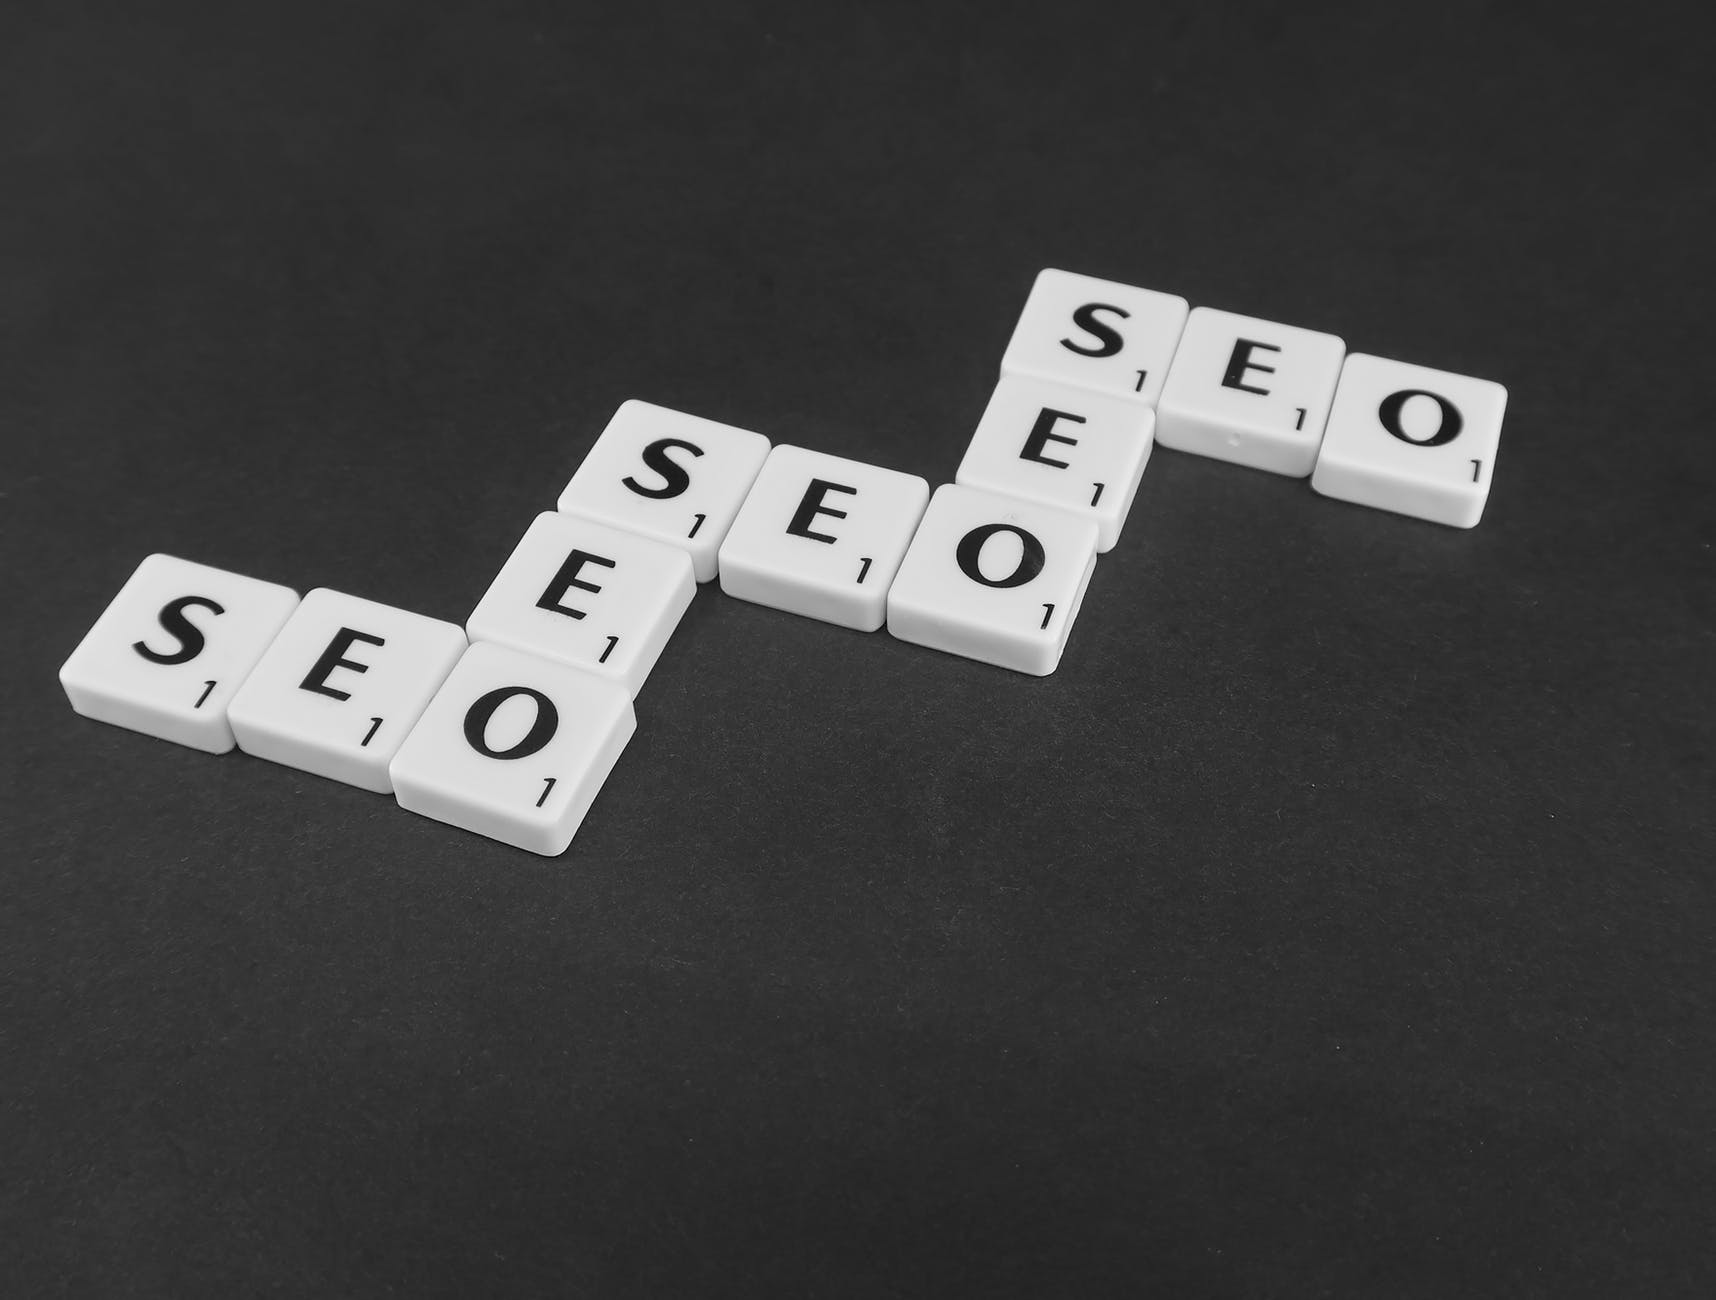 Best SEO Strategies for a Small Business